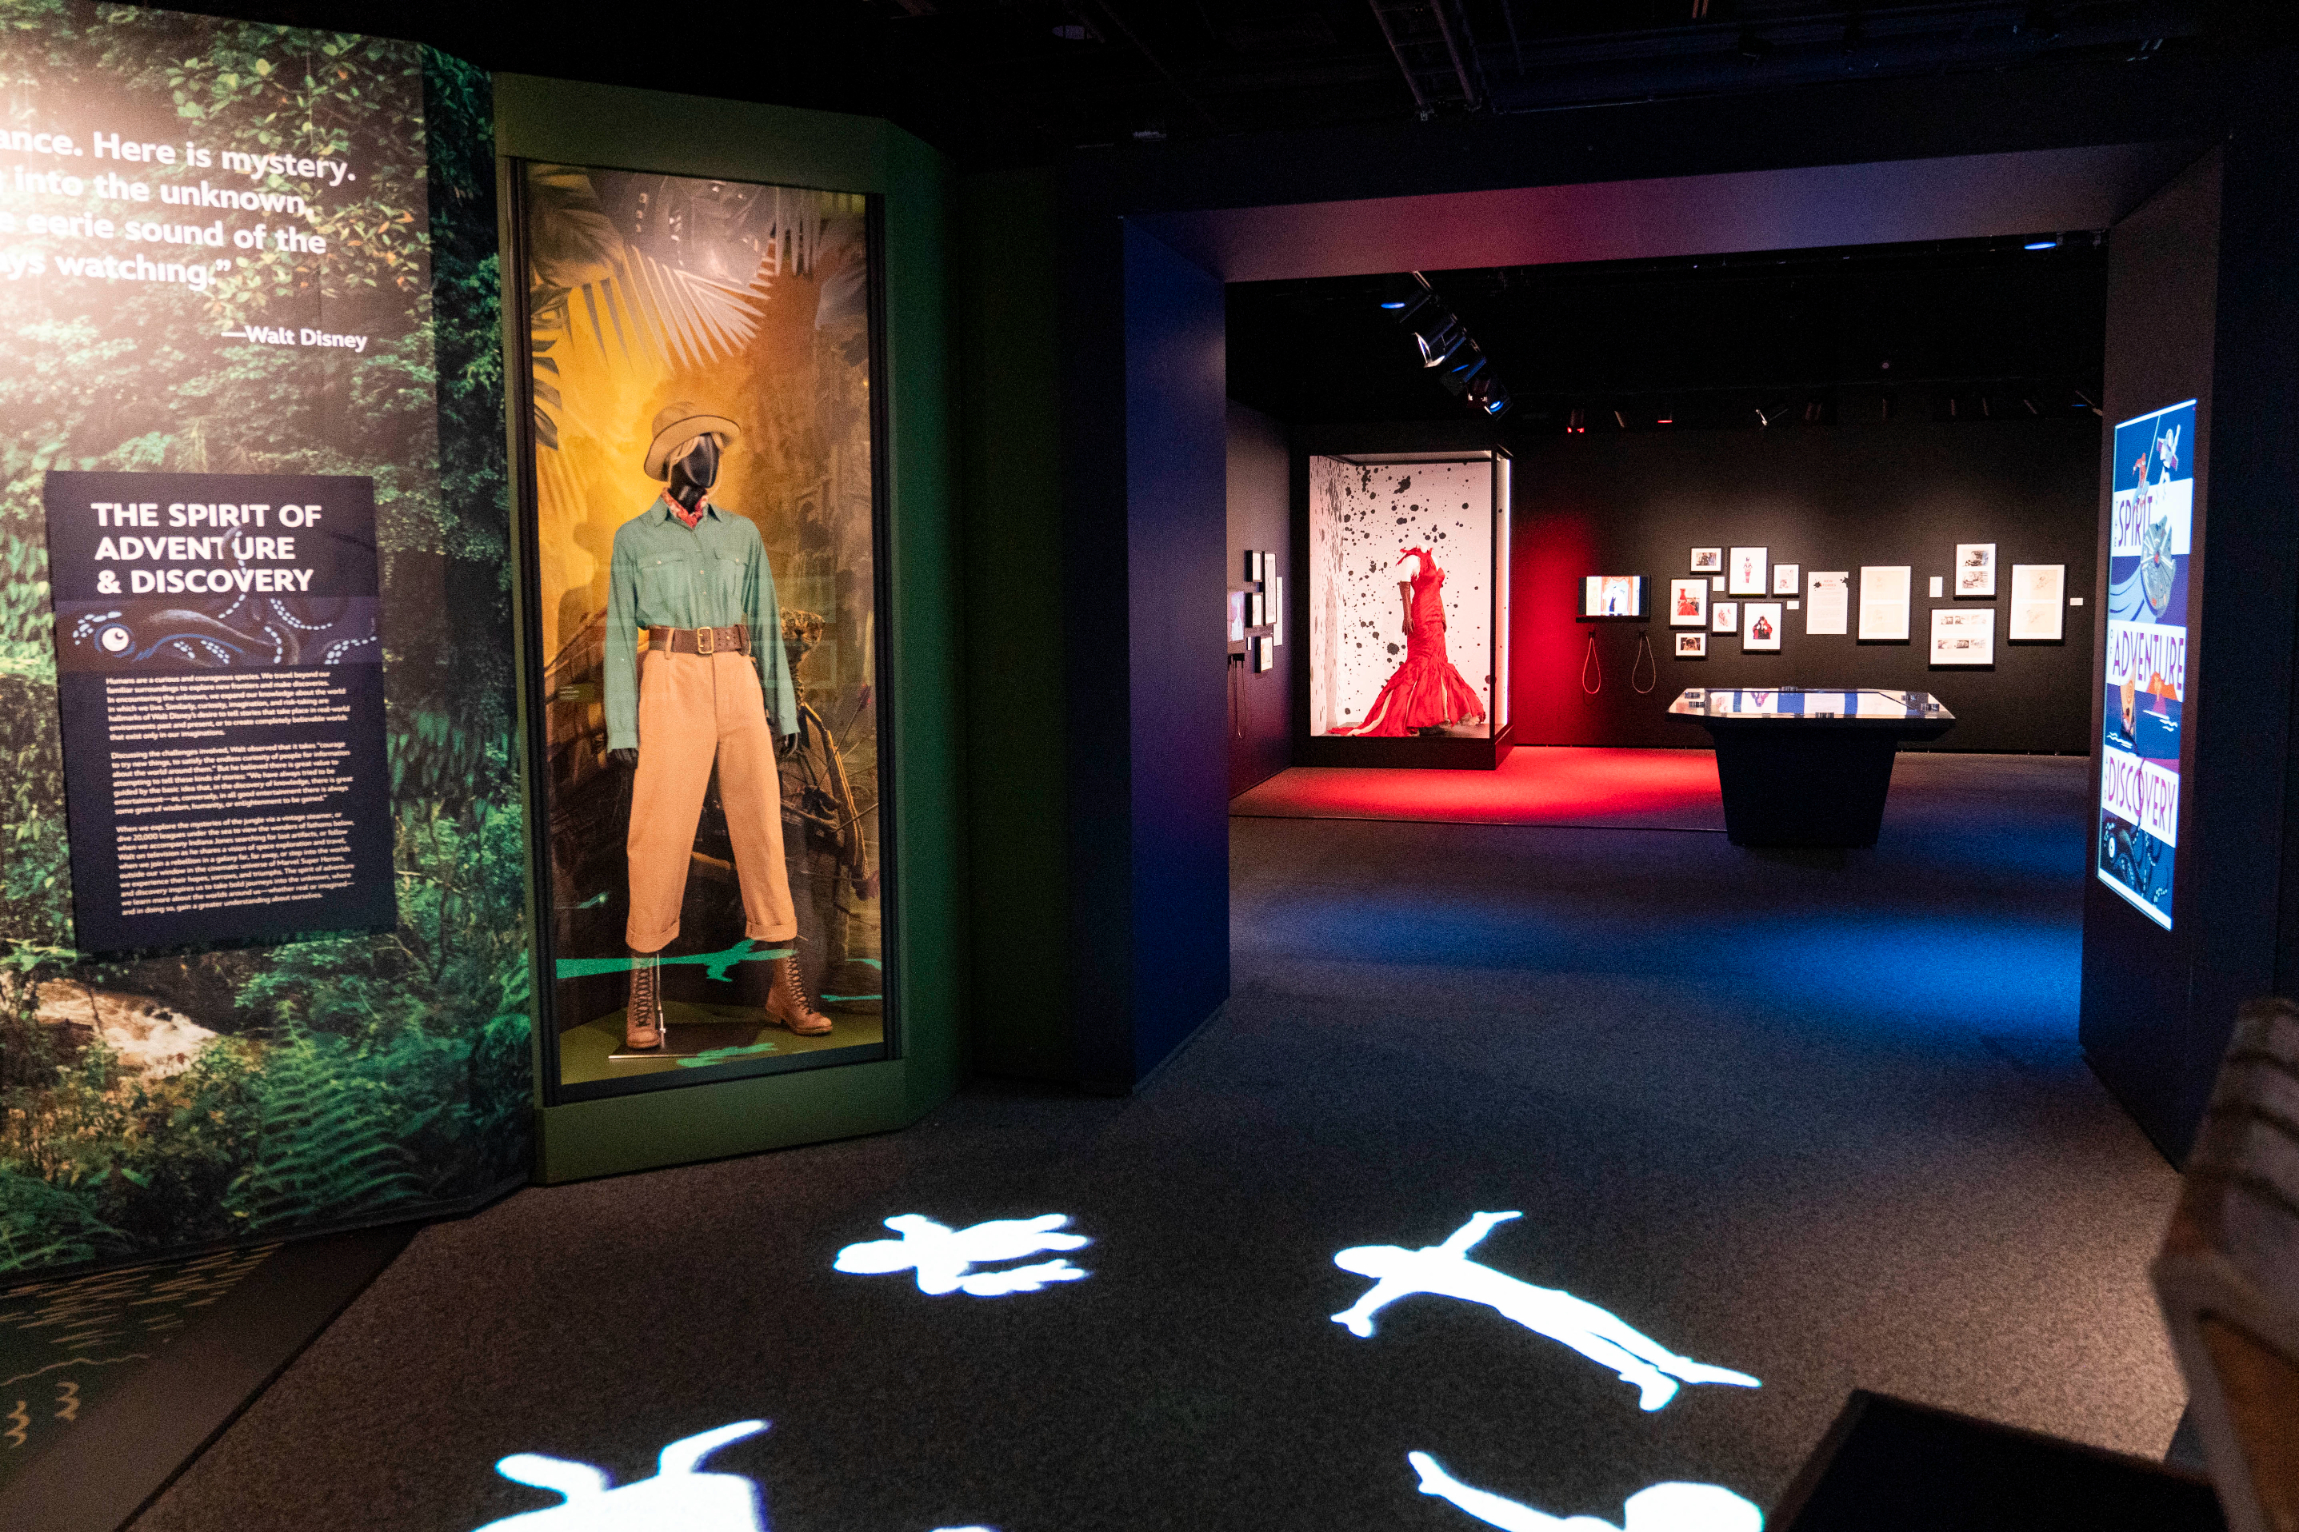 The Spirit of Adventure and Discovery gallery at Disney100: The Exhibition, now open at The Franklin Institute in Philadelphia. ©Disney